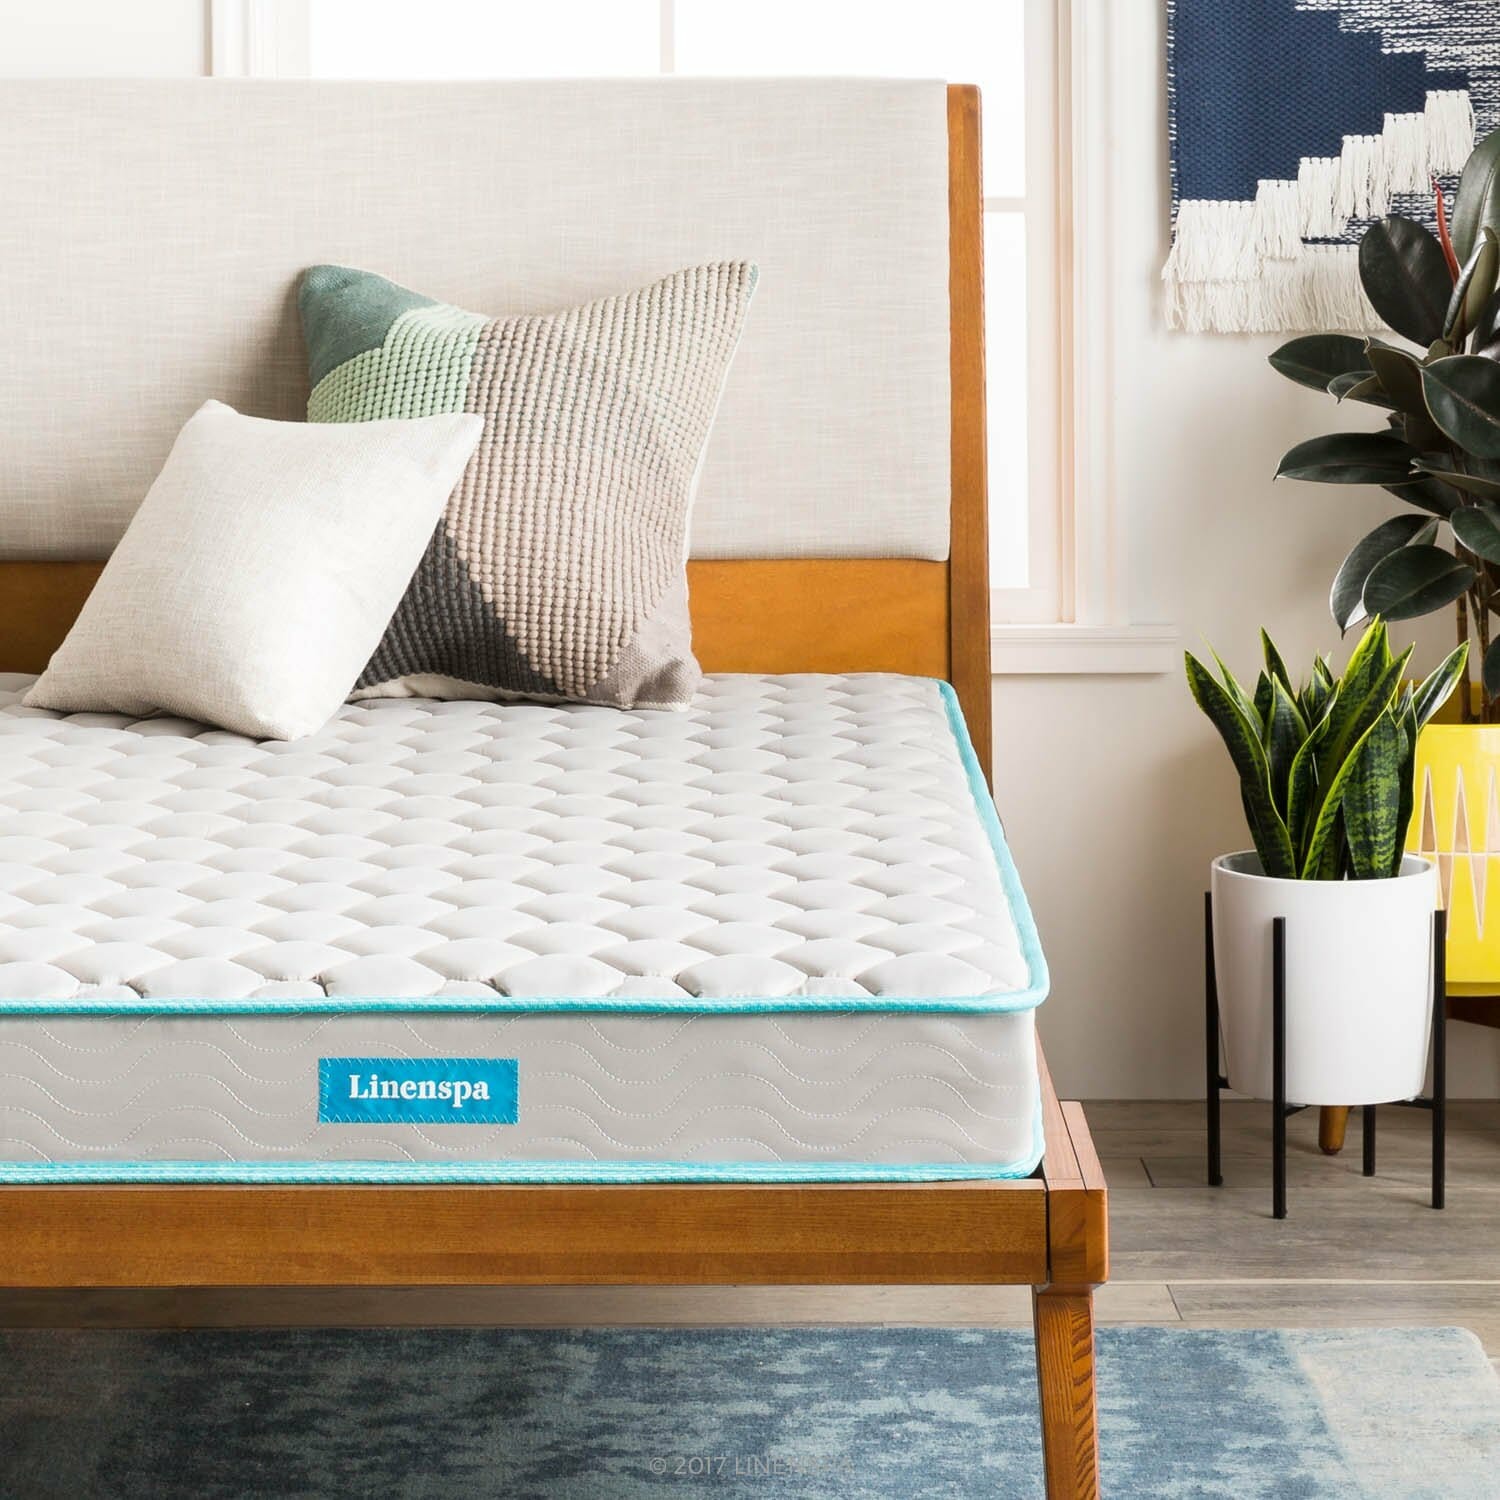 The 10 Best Mattresses For Side Sleepers For 2022 Online Mattress Review 